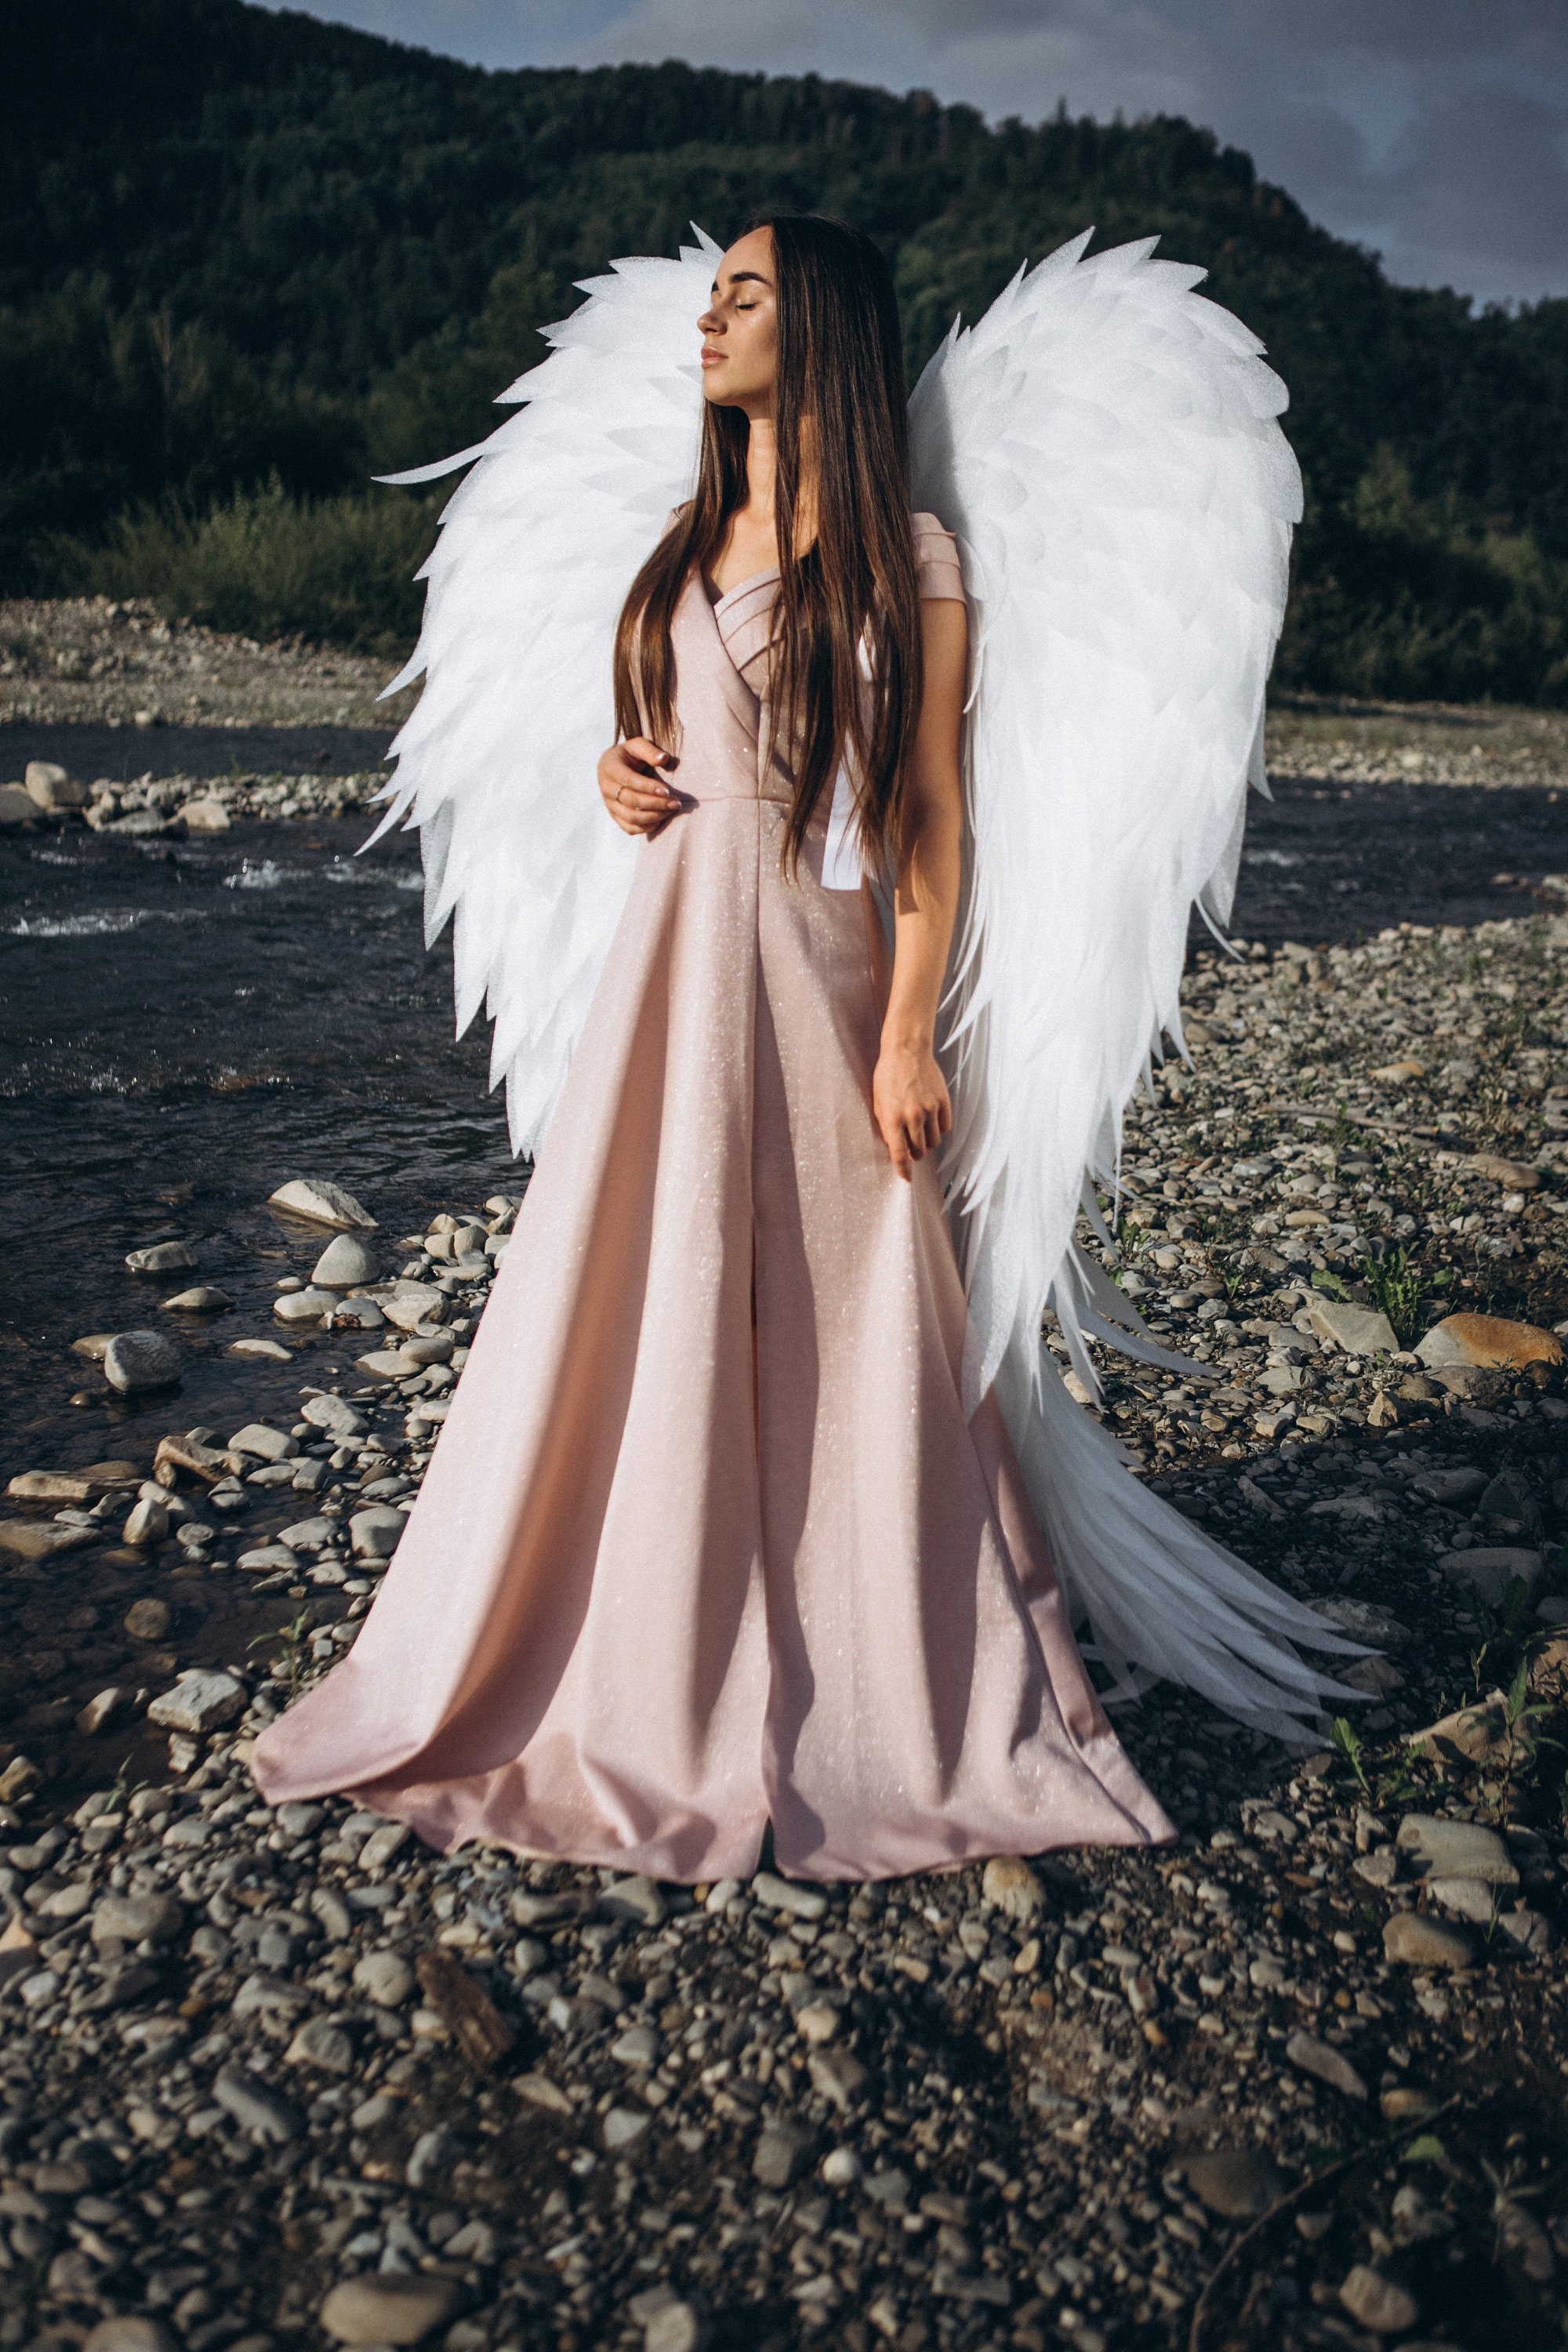 Buy White Angel Wings for Photoshoot Woman Movable Angel Wings Online in  India 